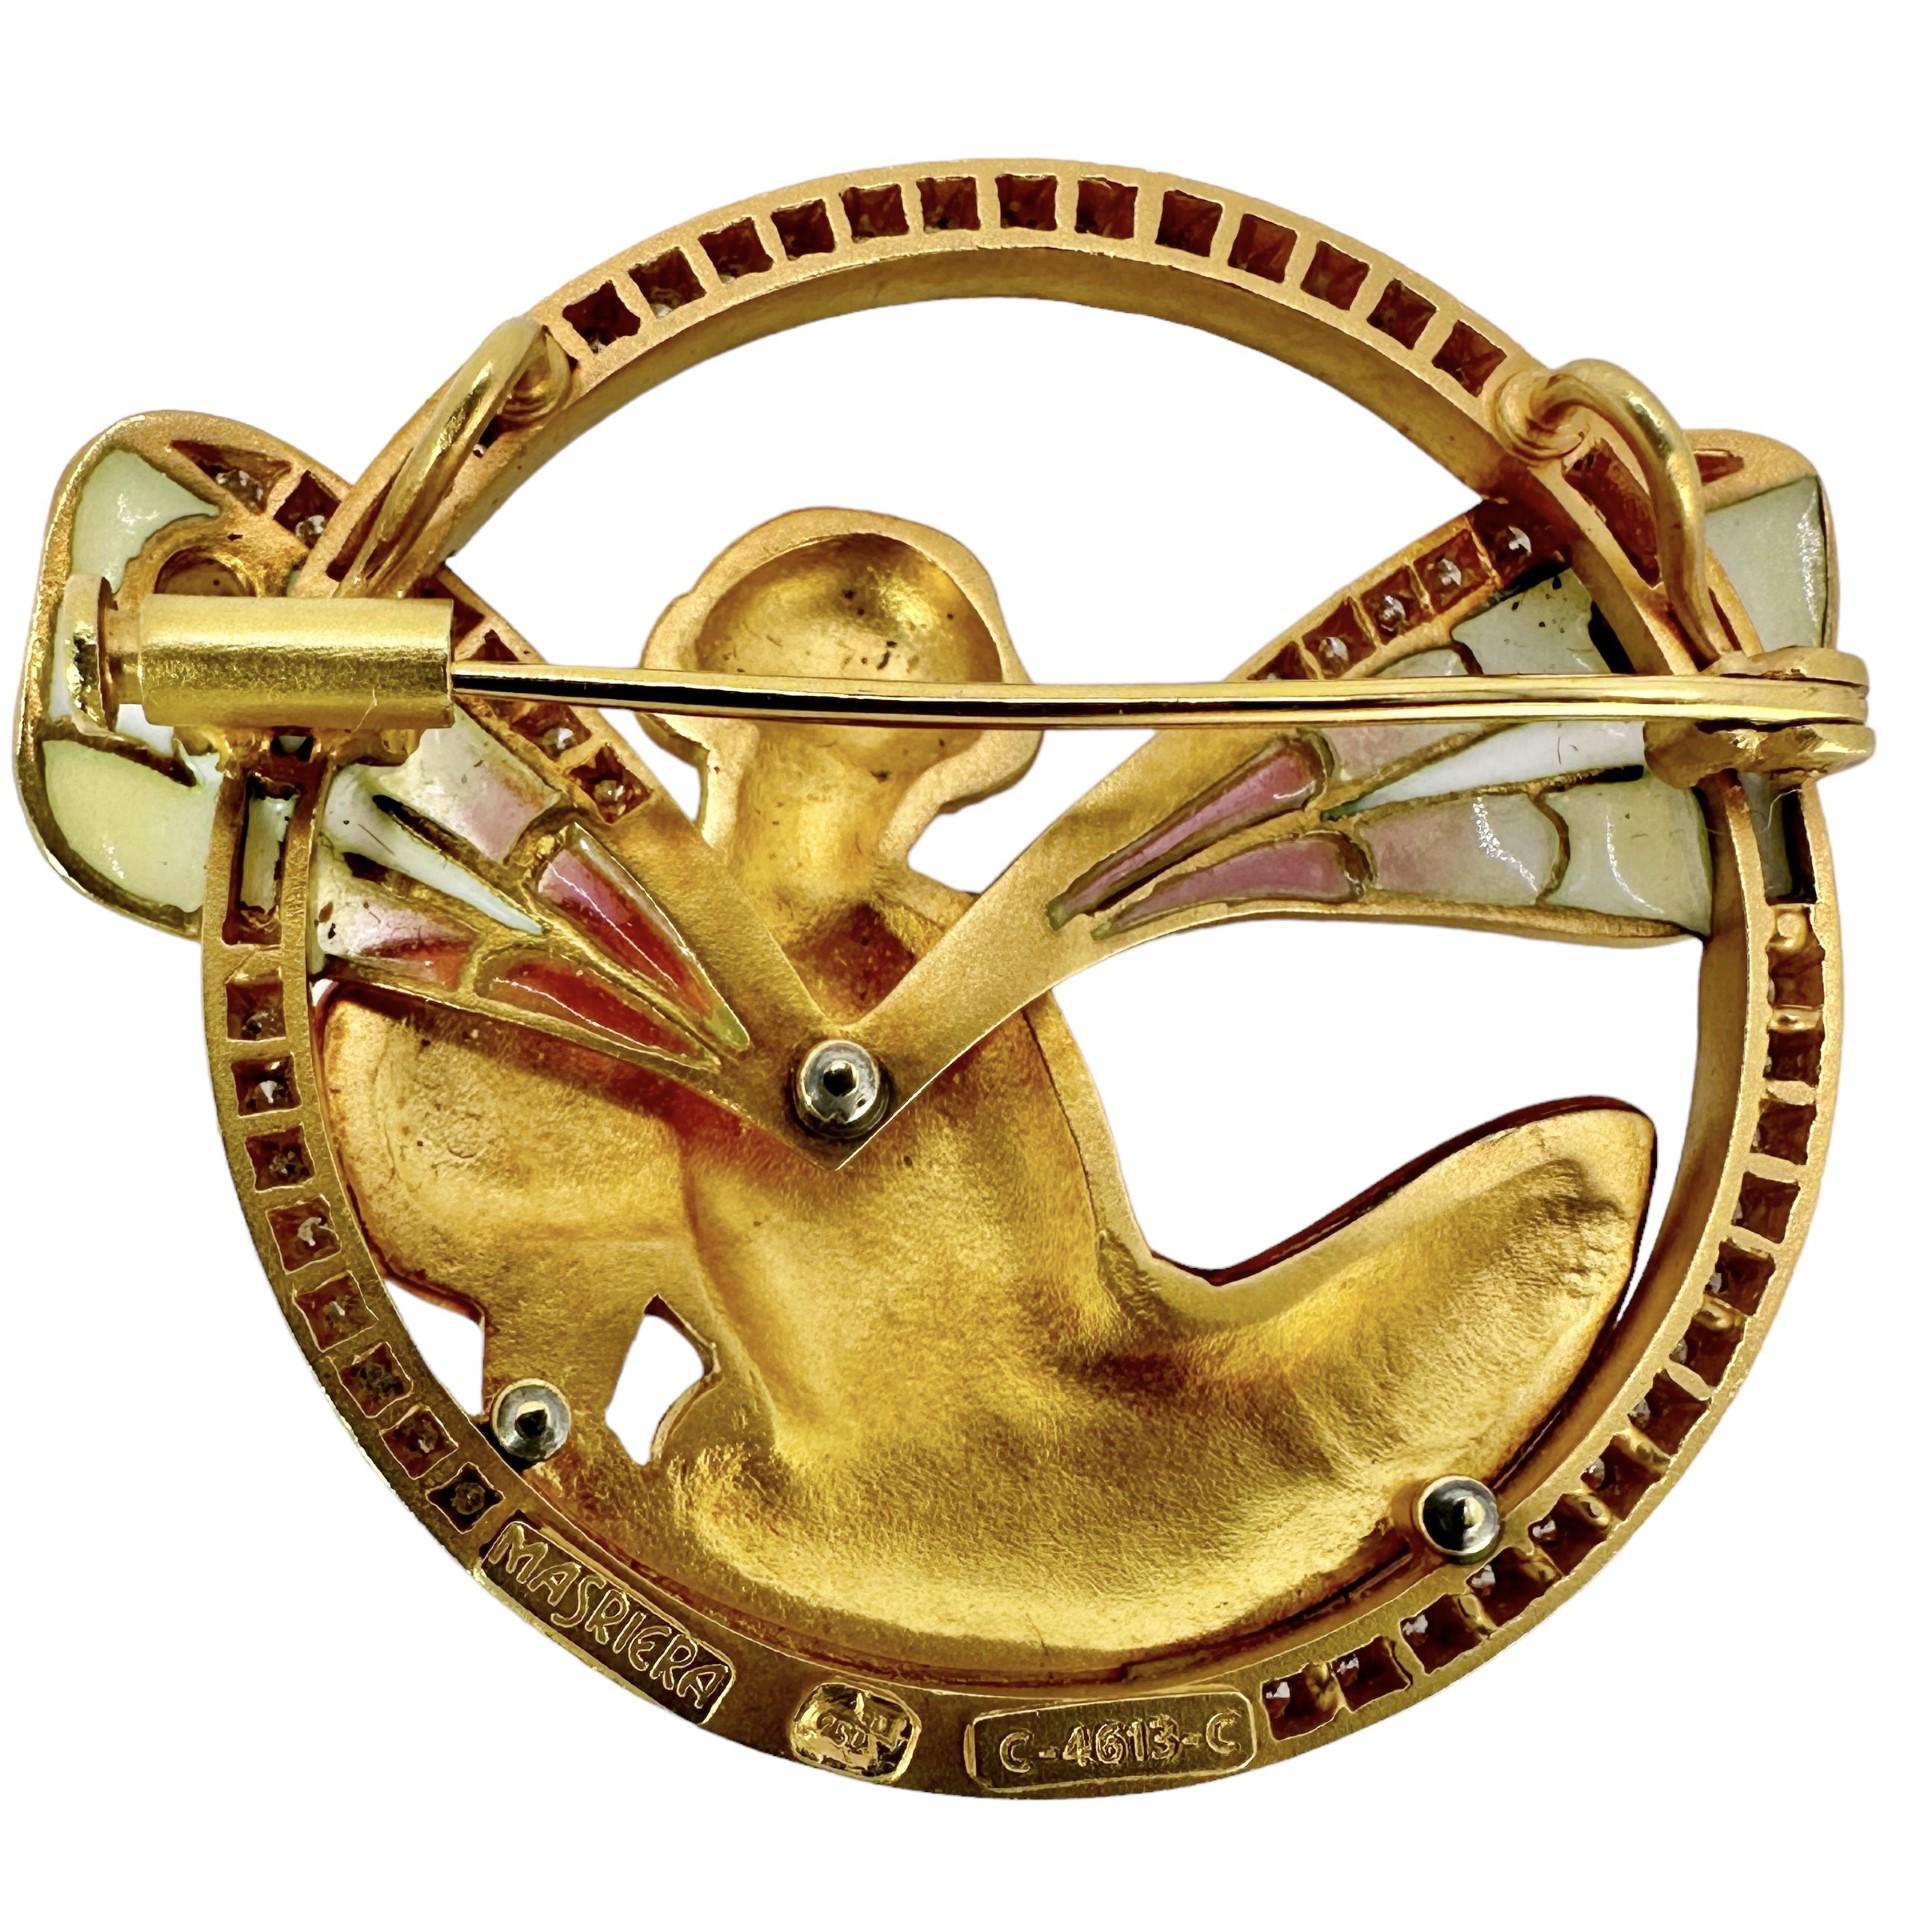 This absolutely elegant Art Nouveau tribute brooch was fabricated from the finest materials and crafted by master jewelers at the esteemed house of Masriera in Barcelona Spain, during the late 20th century. The image is of a winged nymph, depicted